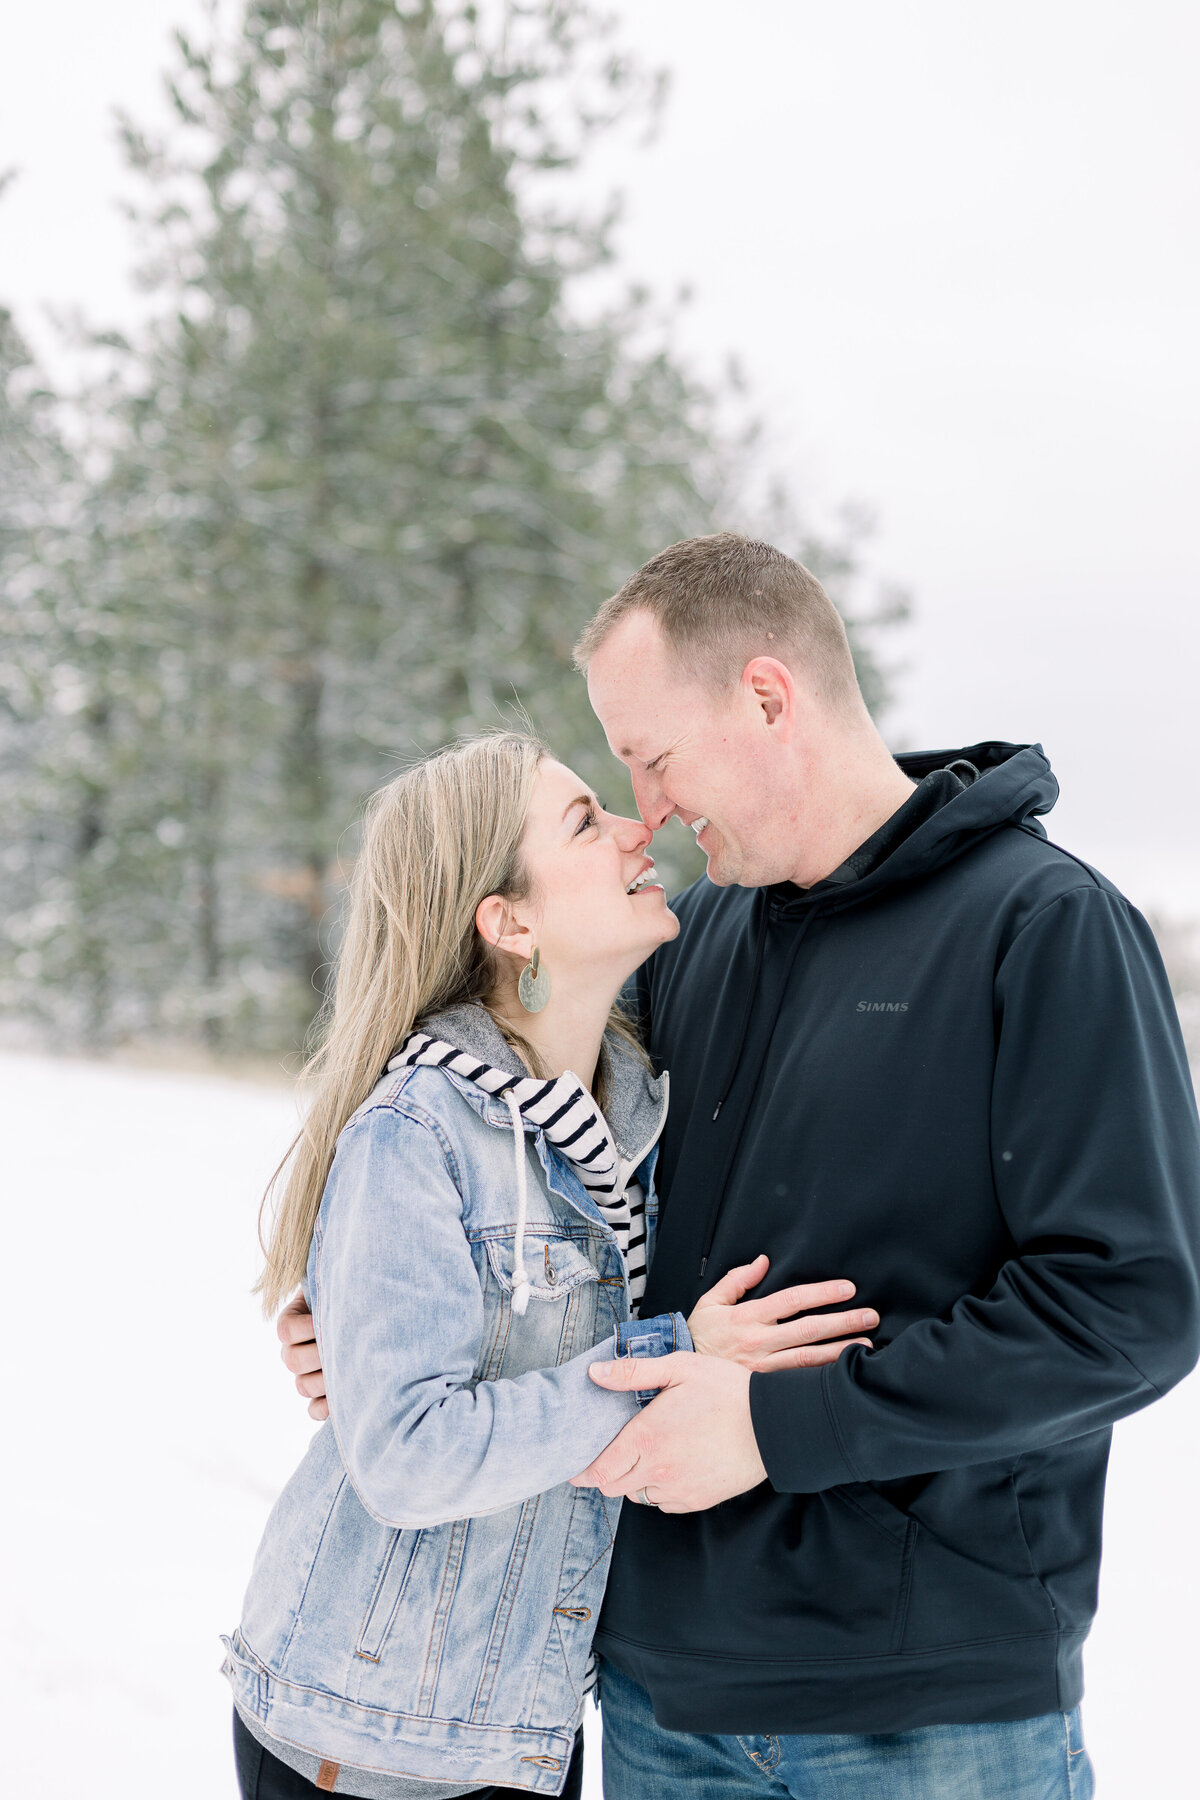 Mom and dad smiling and looking at each other in the cold snow taken by spokane family photographer